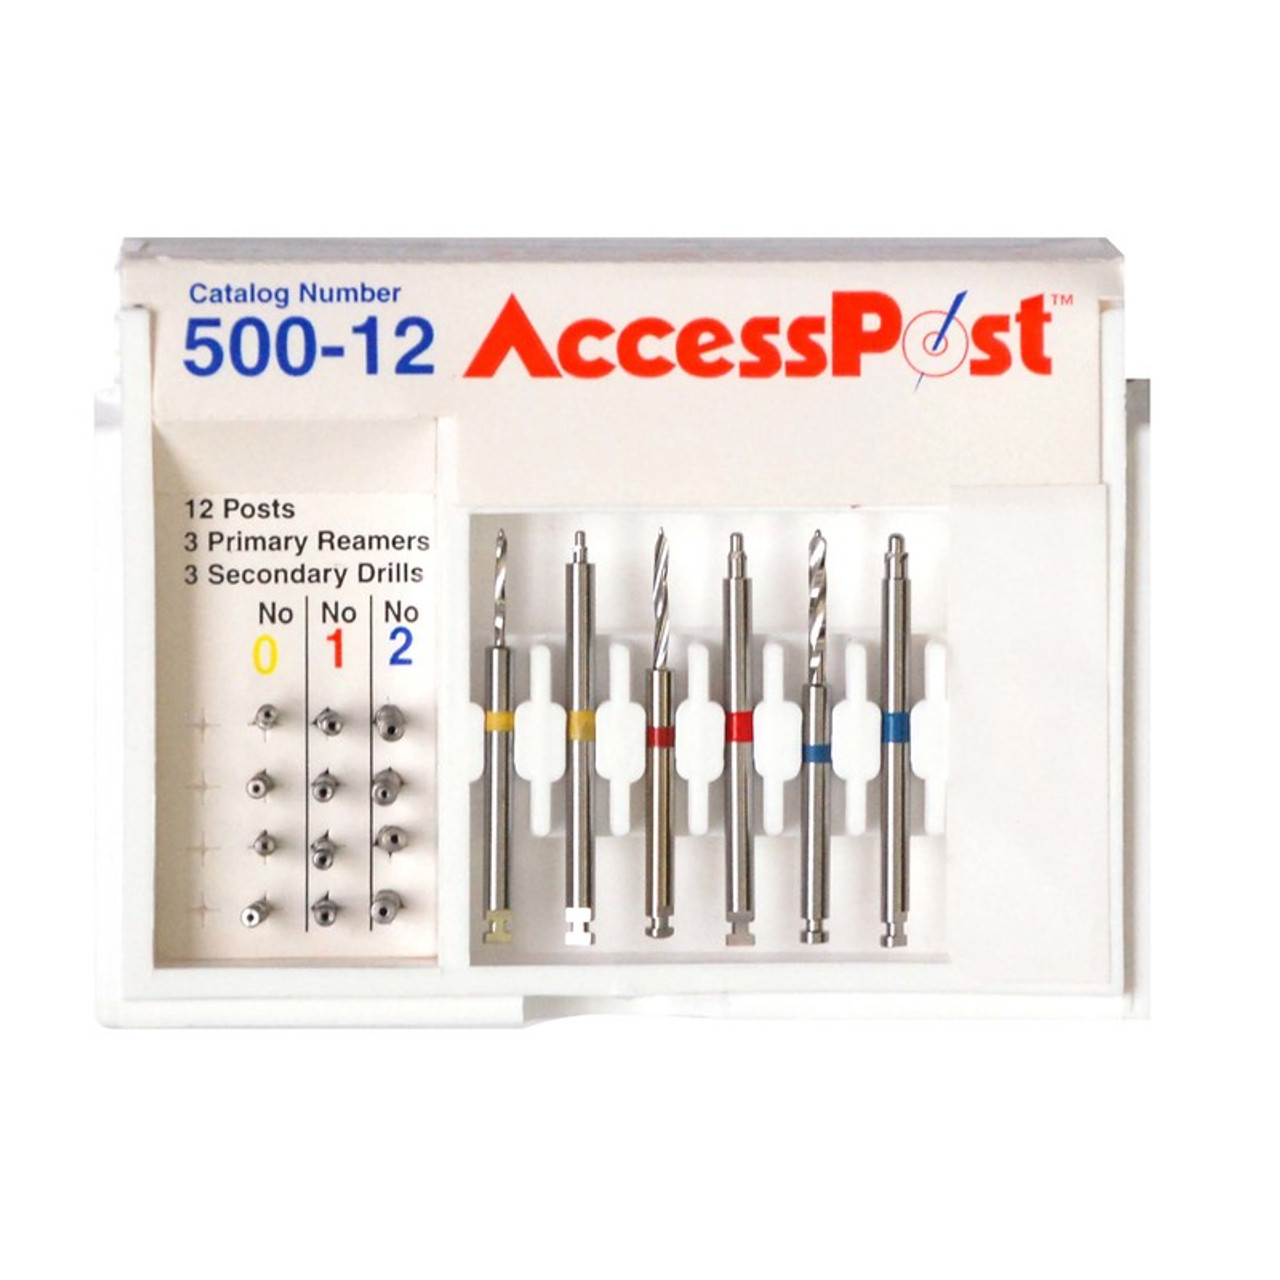 Accesspost Introductory Kit 12 Ea